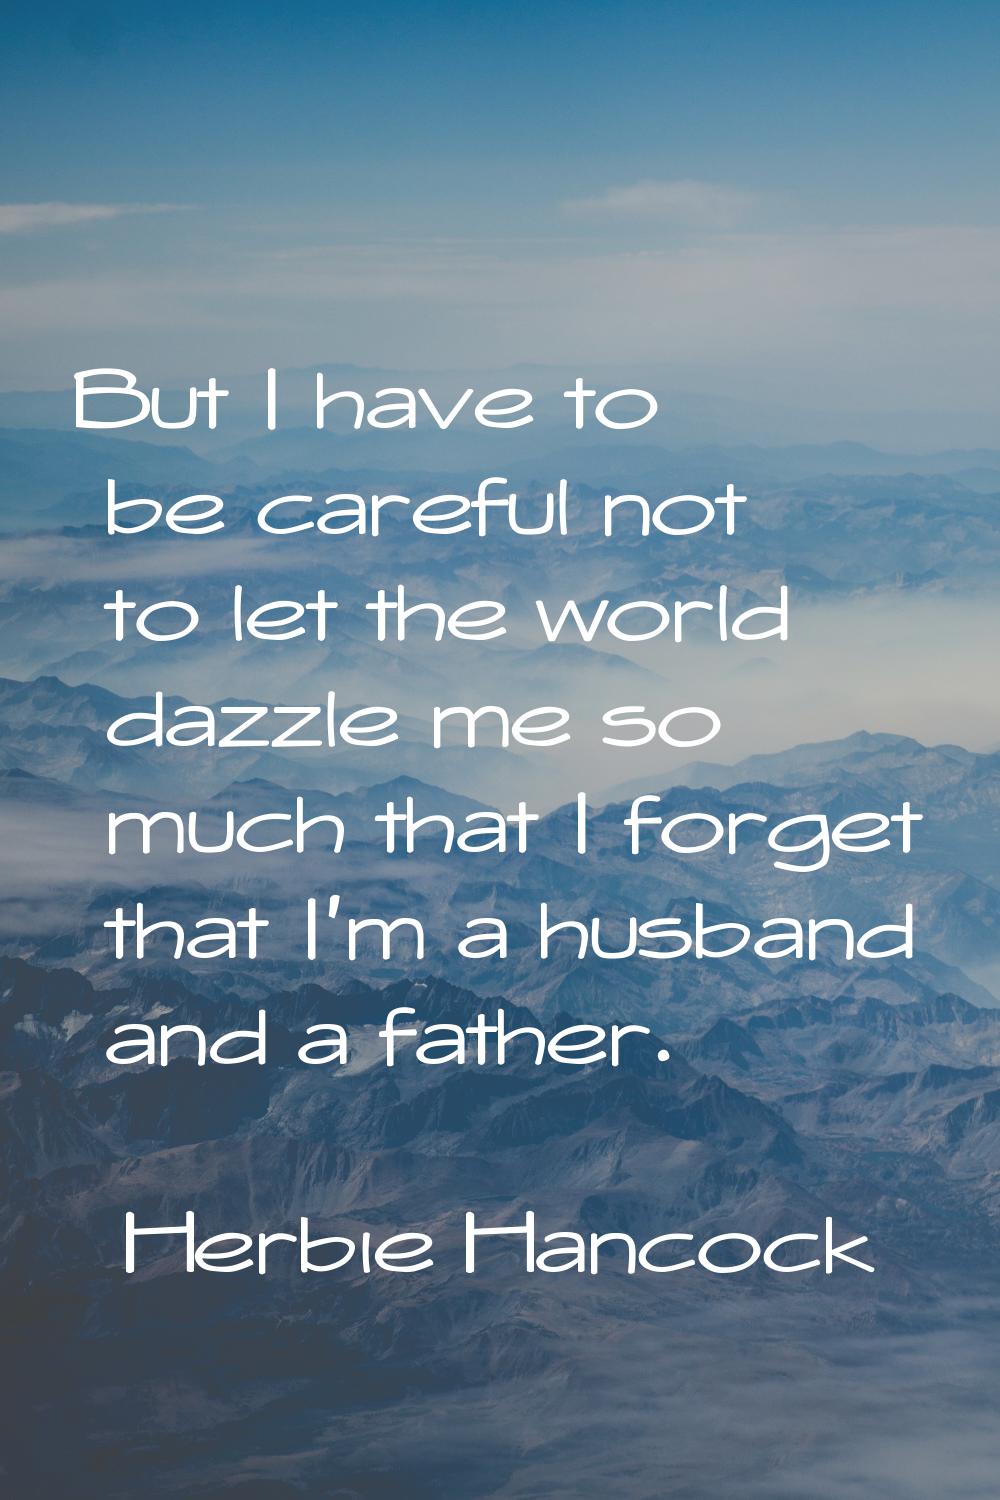 But I have to be careful not to let the world dazzle me so much that I forget that I'm a husband an